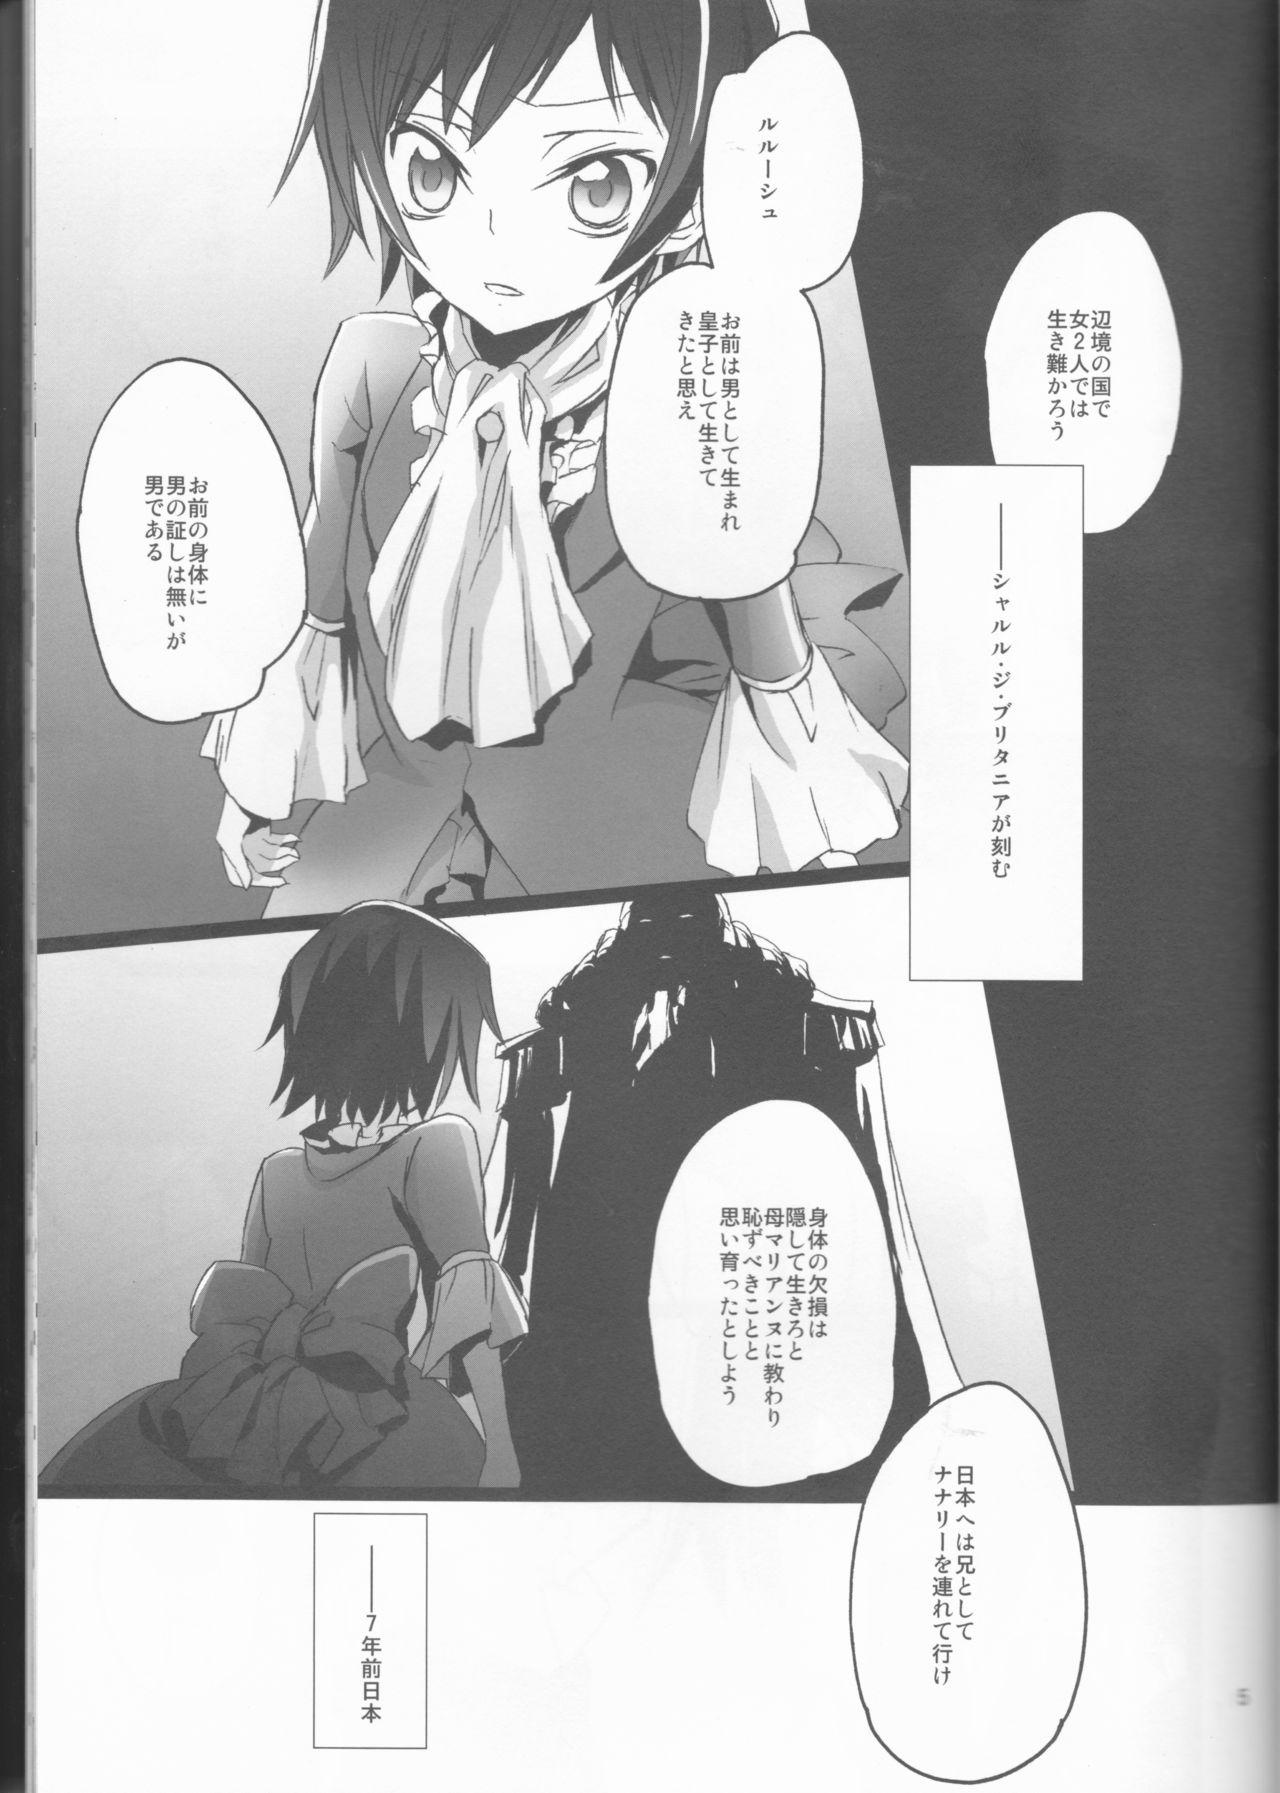 Pale Chameleon Girl - Code geass Gay Shorthair - Page 5